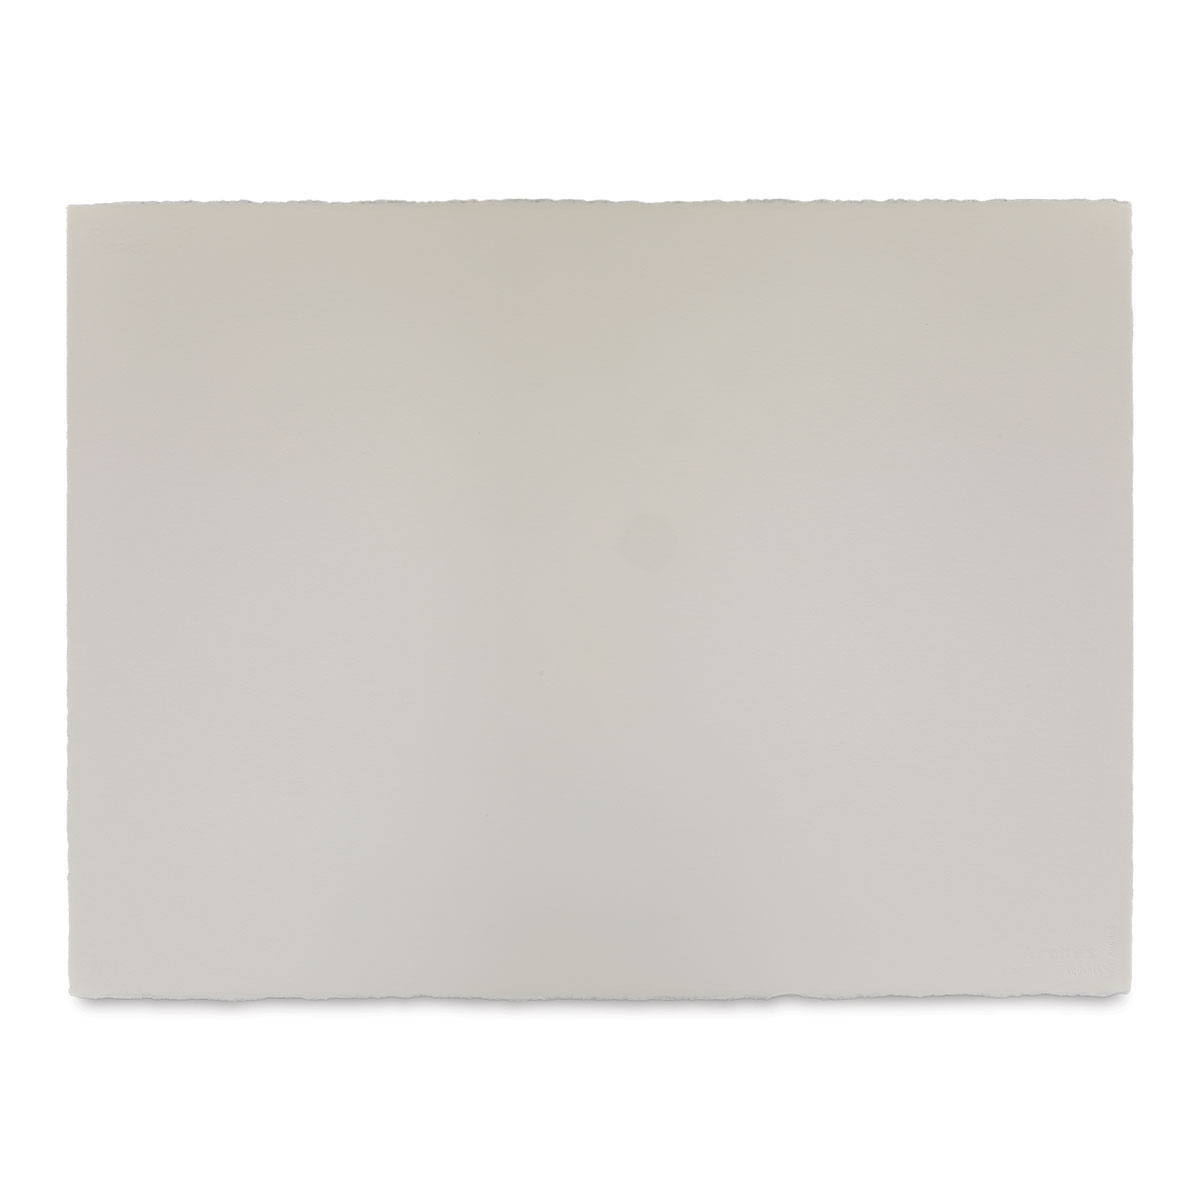 Arches 1795010 22 inch x 30 inch 300 Lb./640g Cold Press Watercolor Sheets Natural White